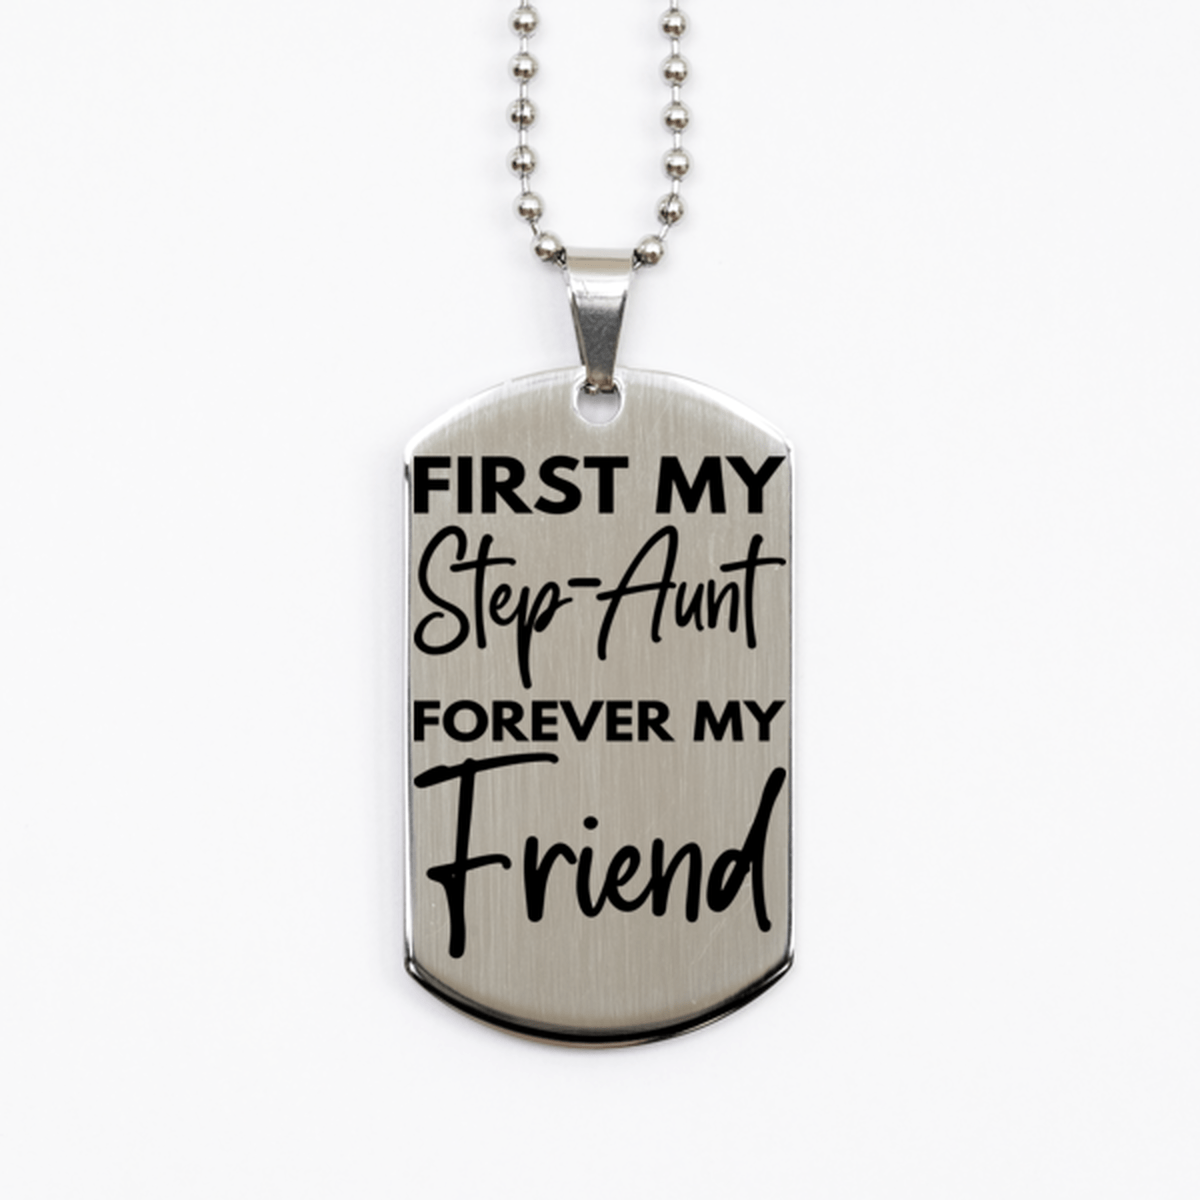 Inspirational Step-Aunt Silver Dog Tag Necklace, First My Step-Aunt Forever My Friend, Best Birthday Gifts for Step-Aunt